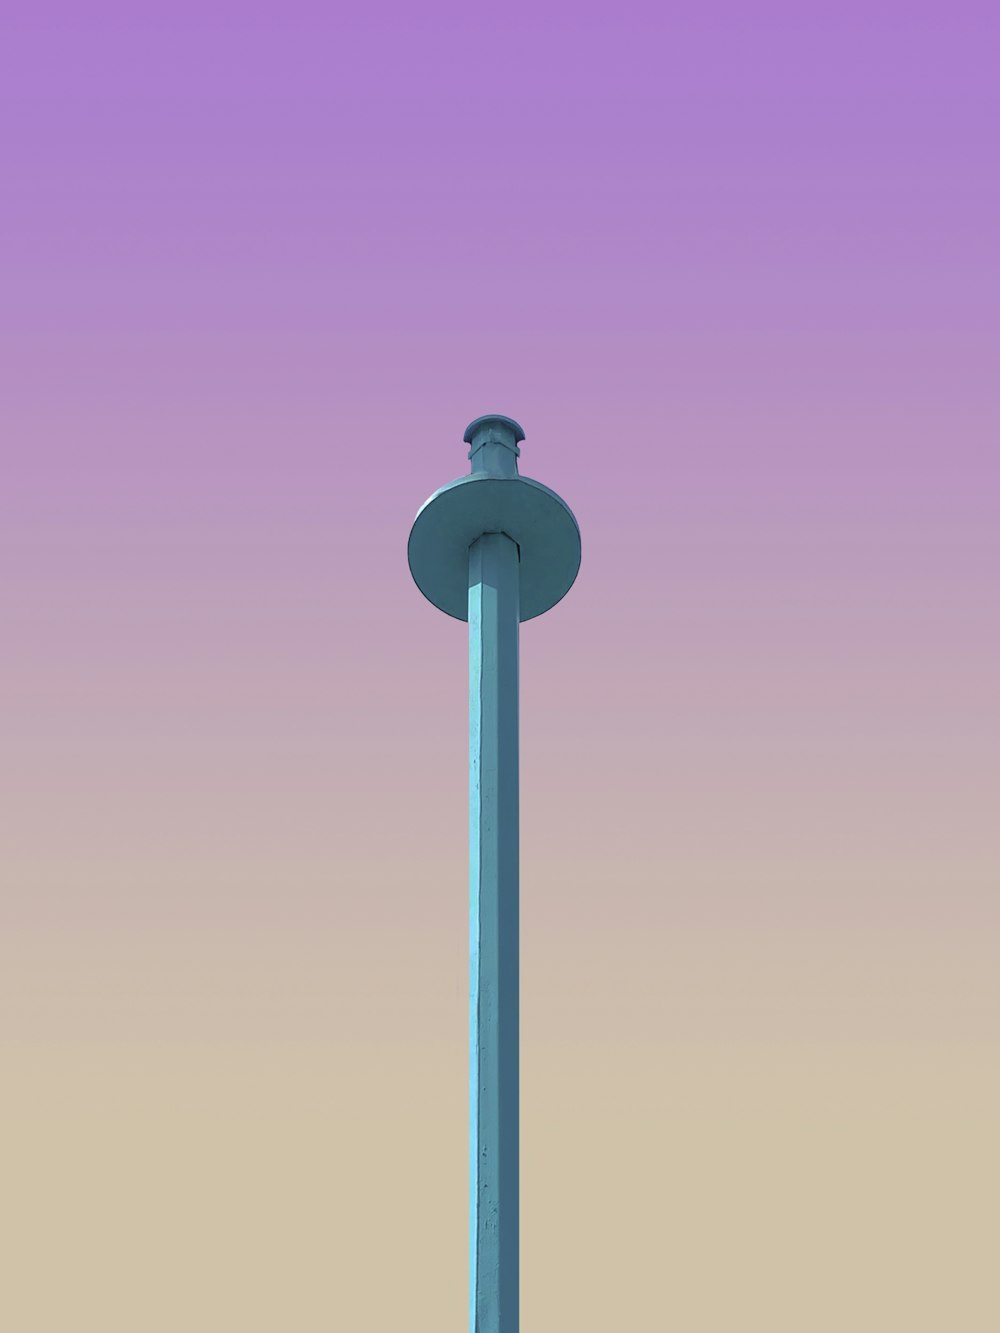 a tall light pole with a purple sky in the background